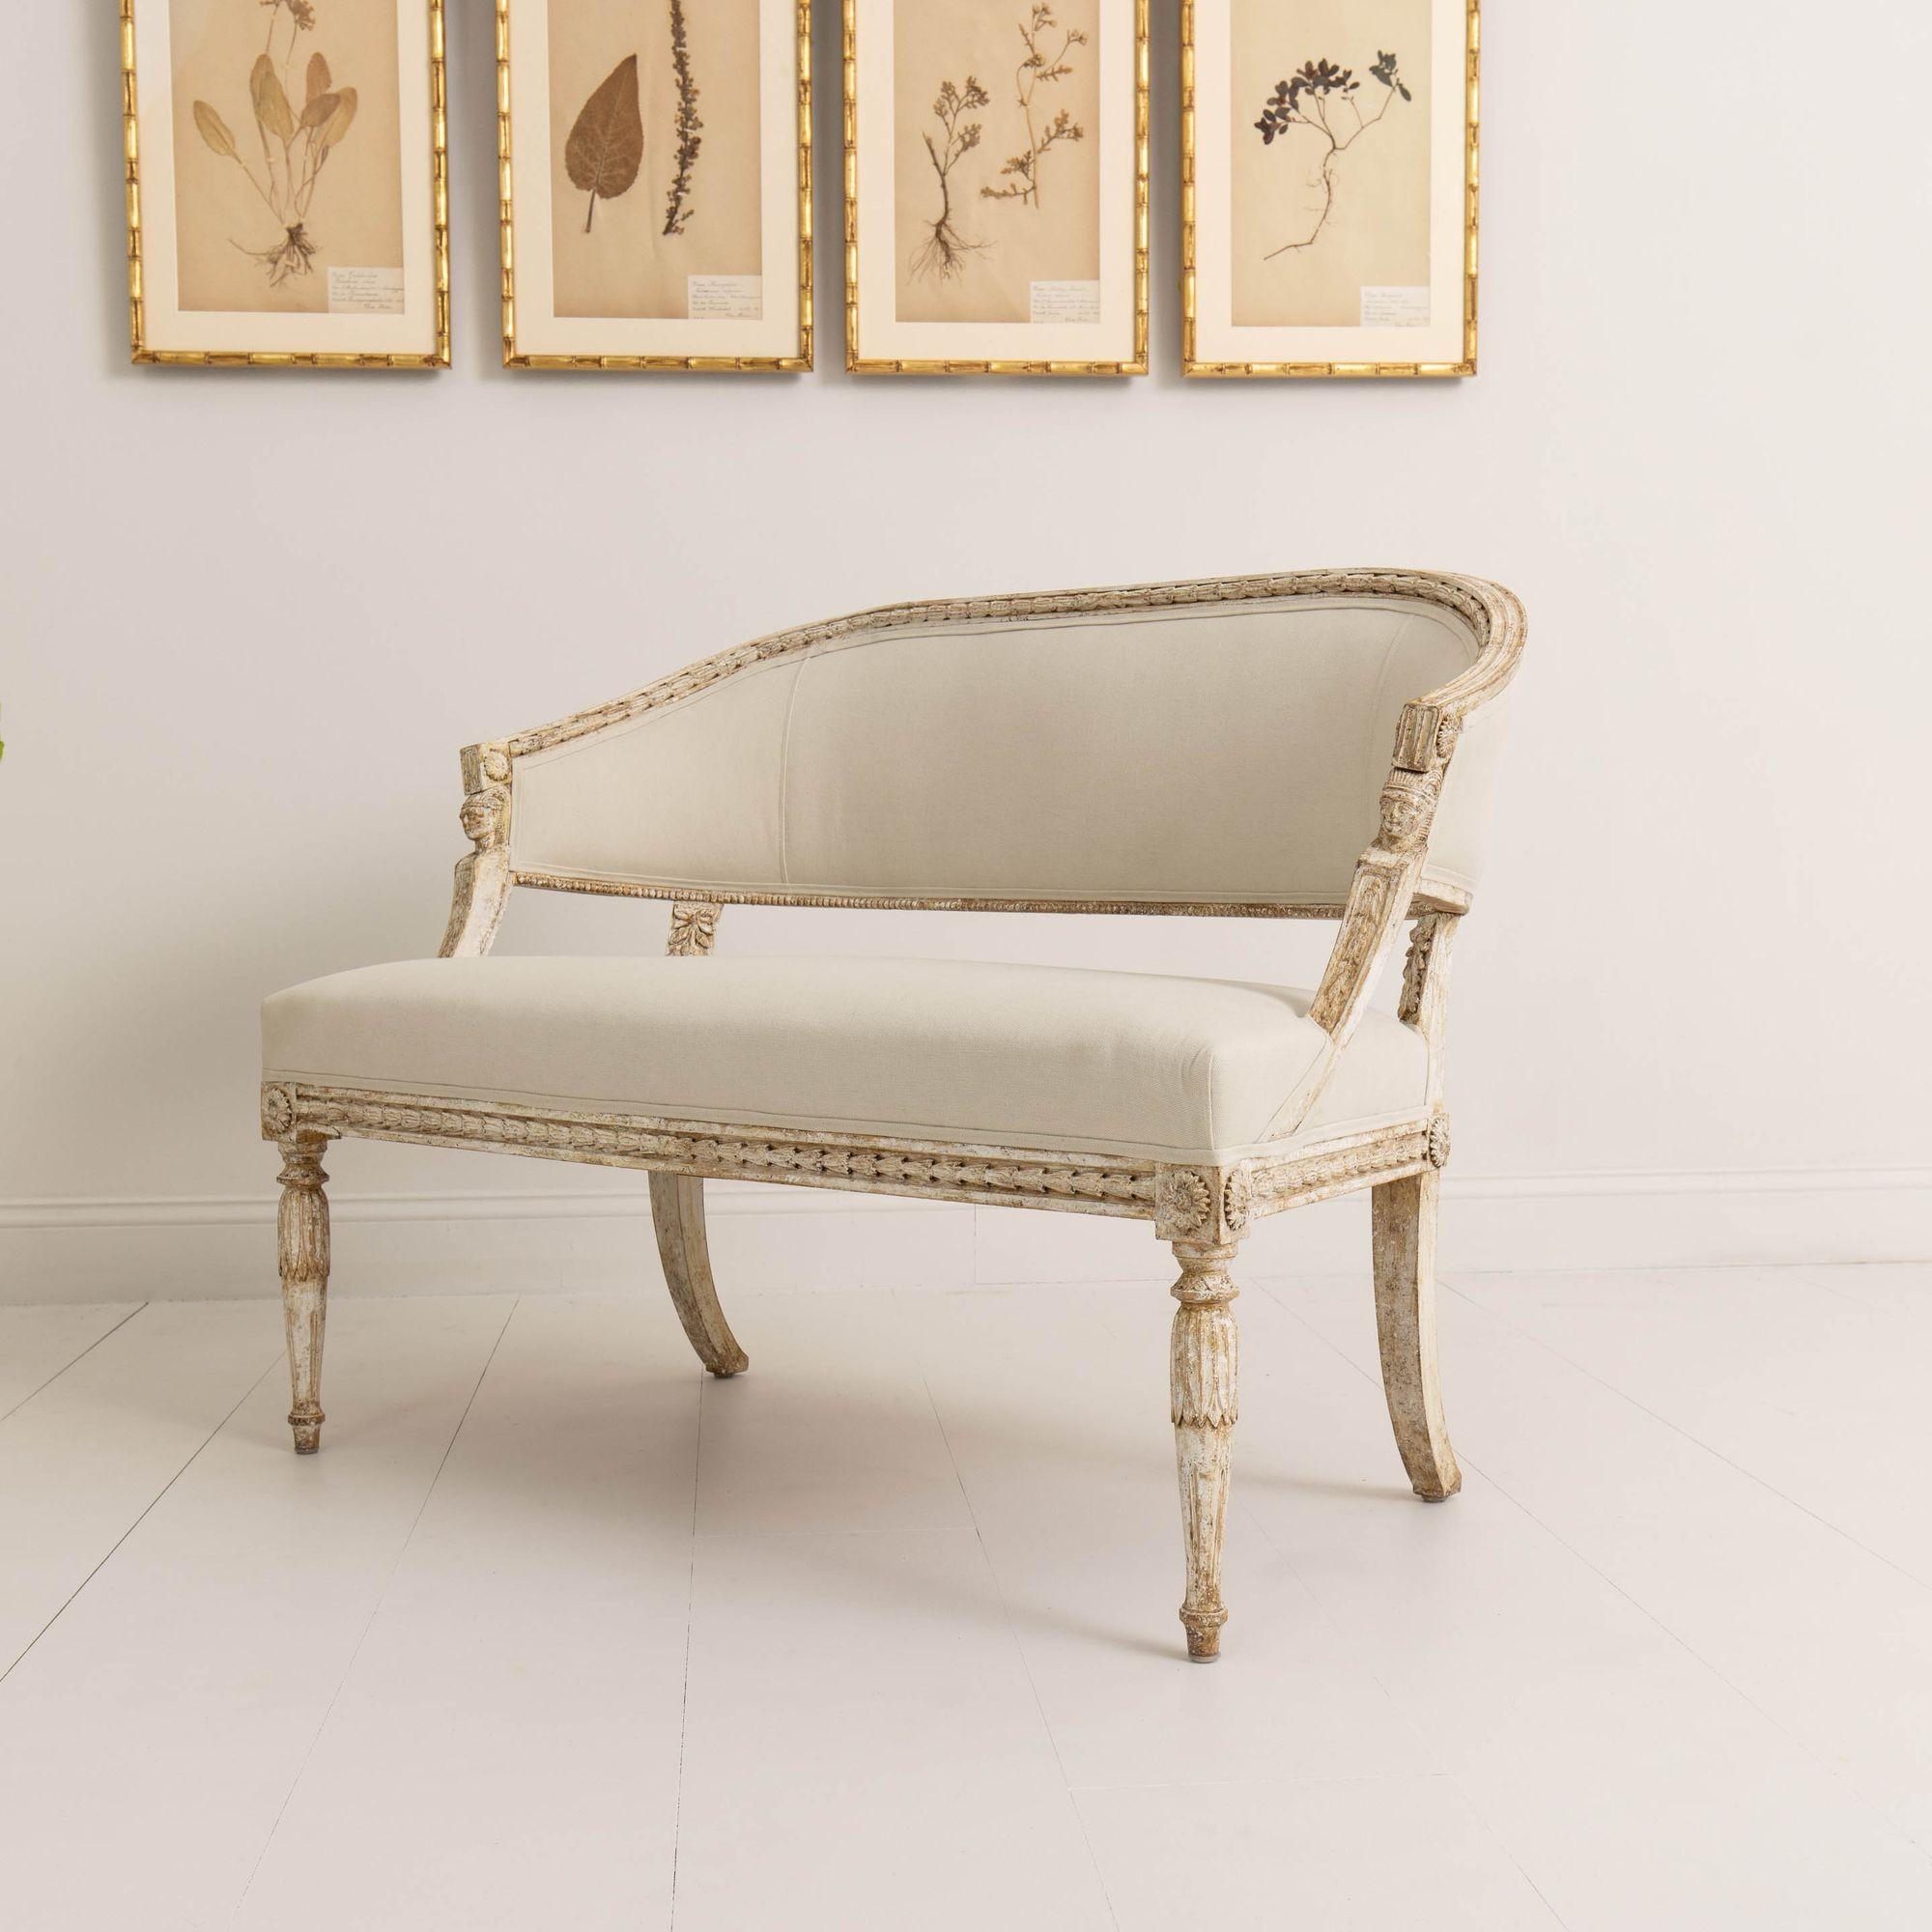 19th c. Swedish Gustavian Settee with Egyptian Carvings in Original Paint For Sale 8